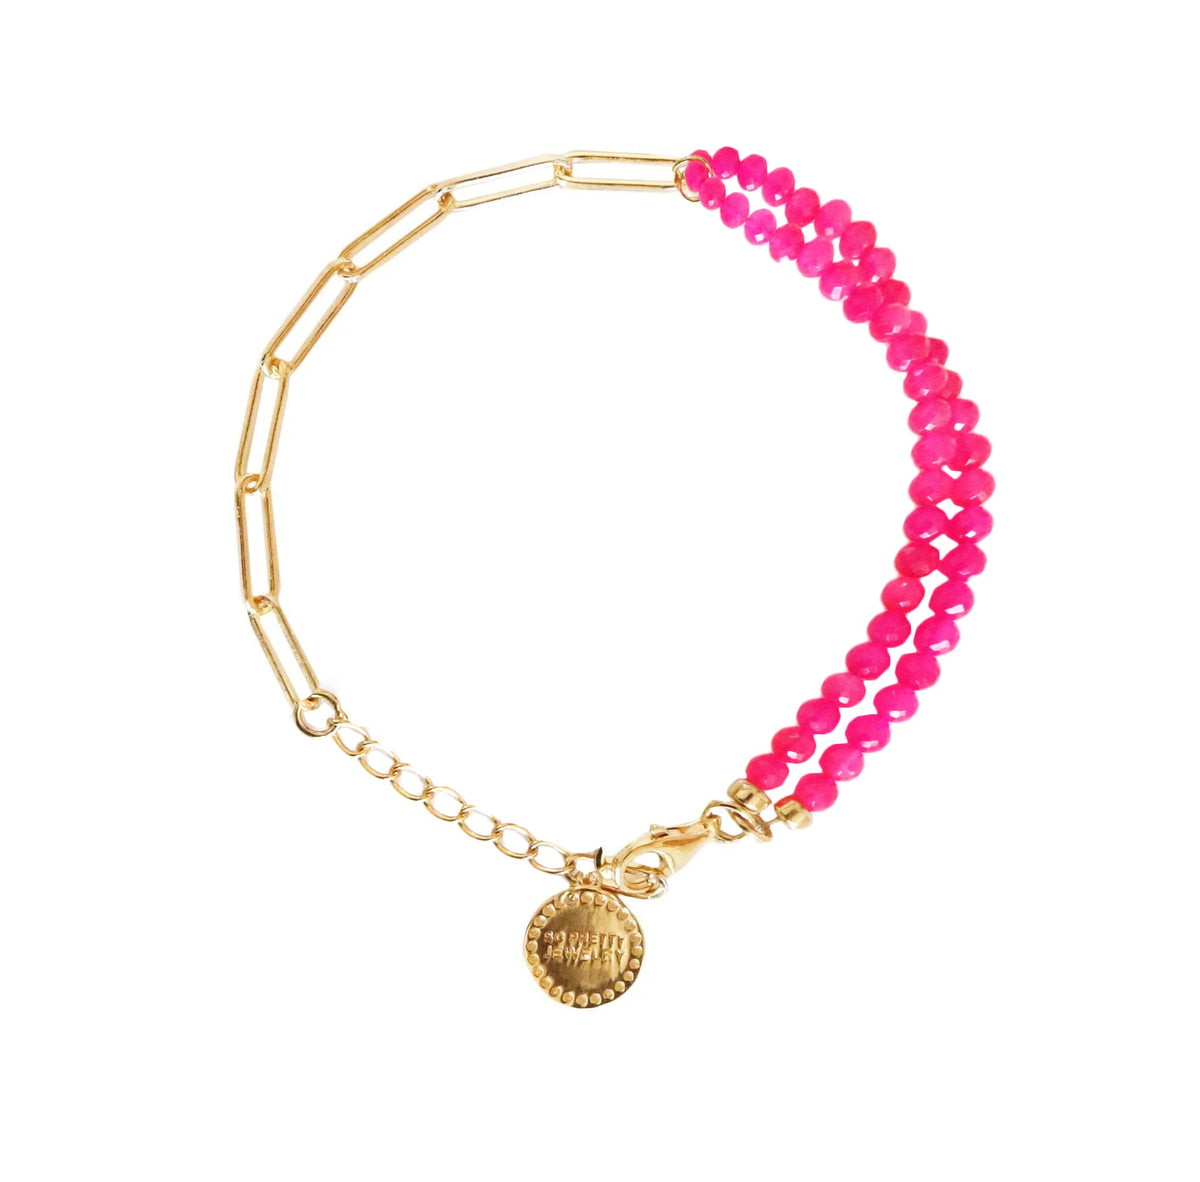 POISE BEADED LINK BRACELET - HOT PINK CHALCEDONY &amp; GOLD 7-8&quot; - SO PRETTY CARA COTTER